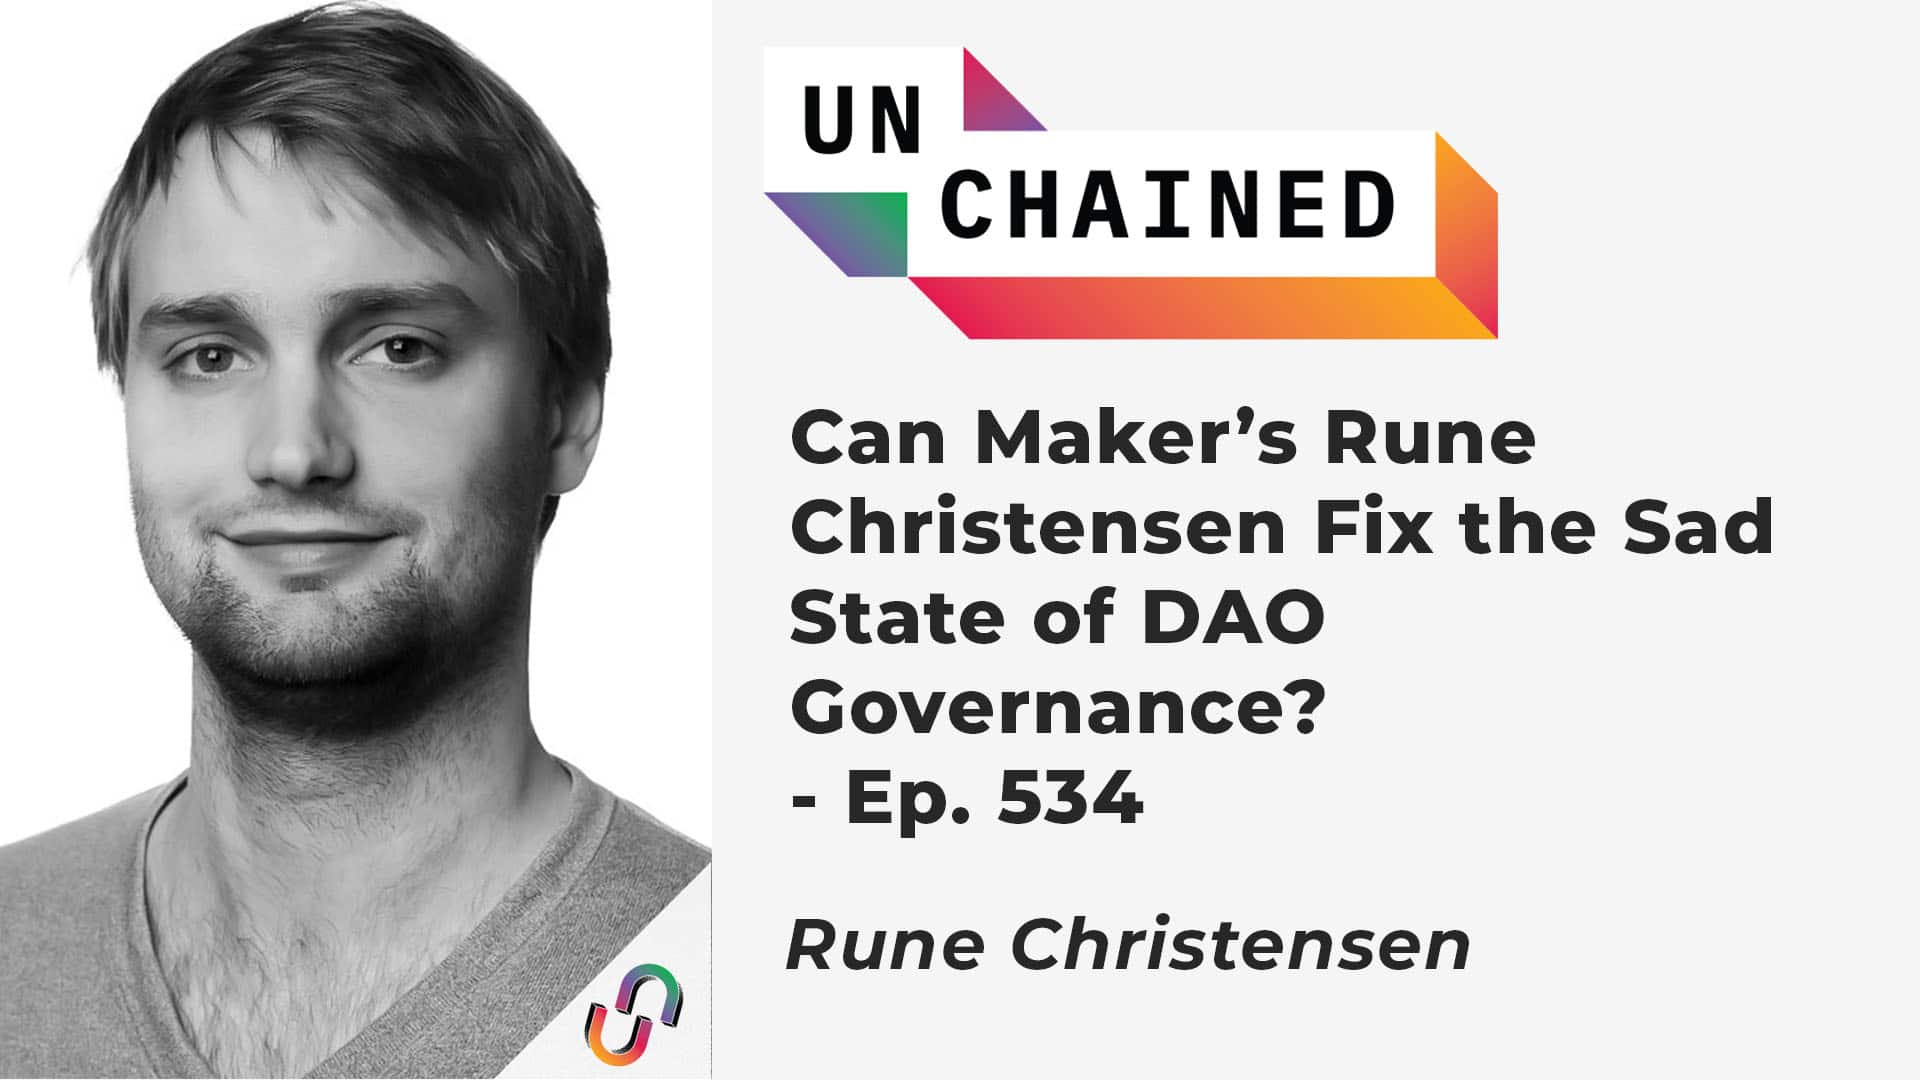 Can Maker’s Rune Christensen Fix the Sad State of DAO Governance? - Ep. 534